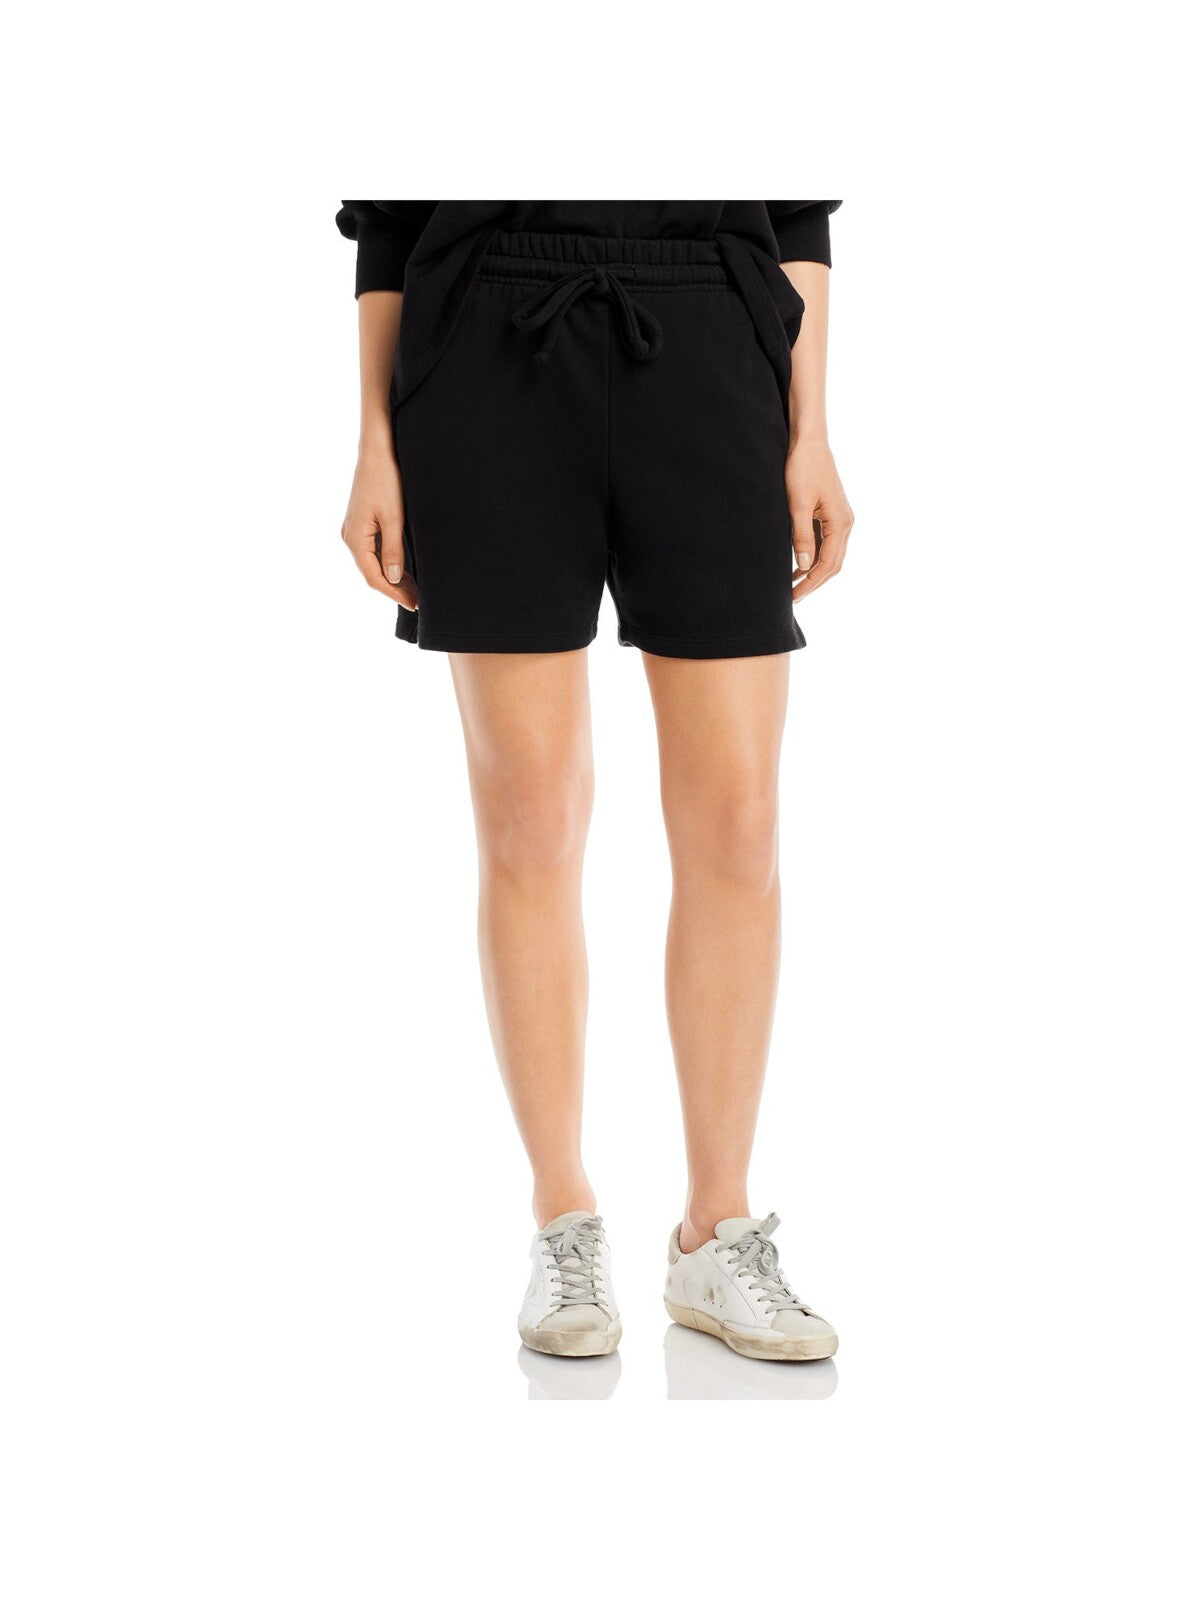 YEAR OF OURS Womens Black Pocketed Drawstring Waist Boyfriend Shorts XS